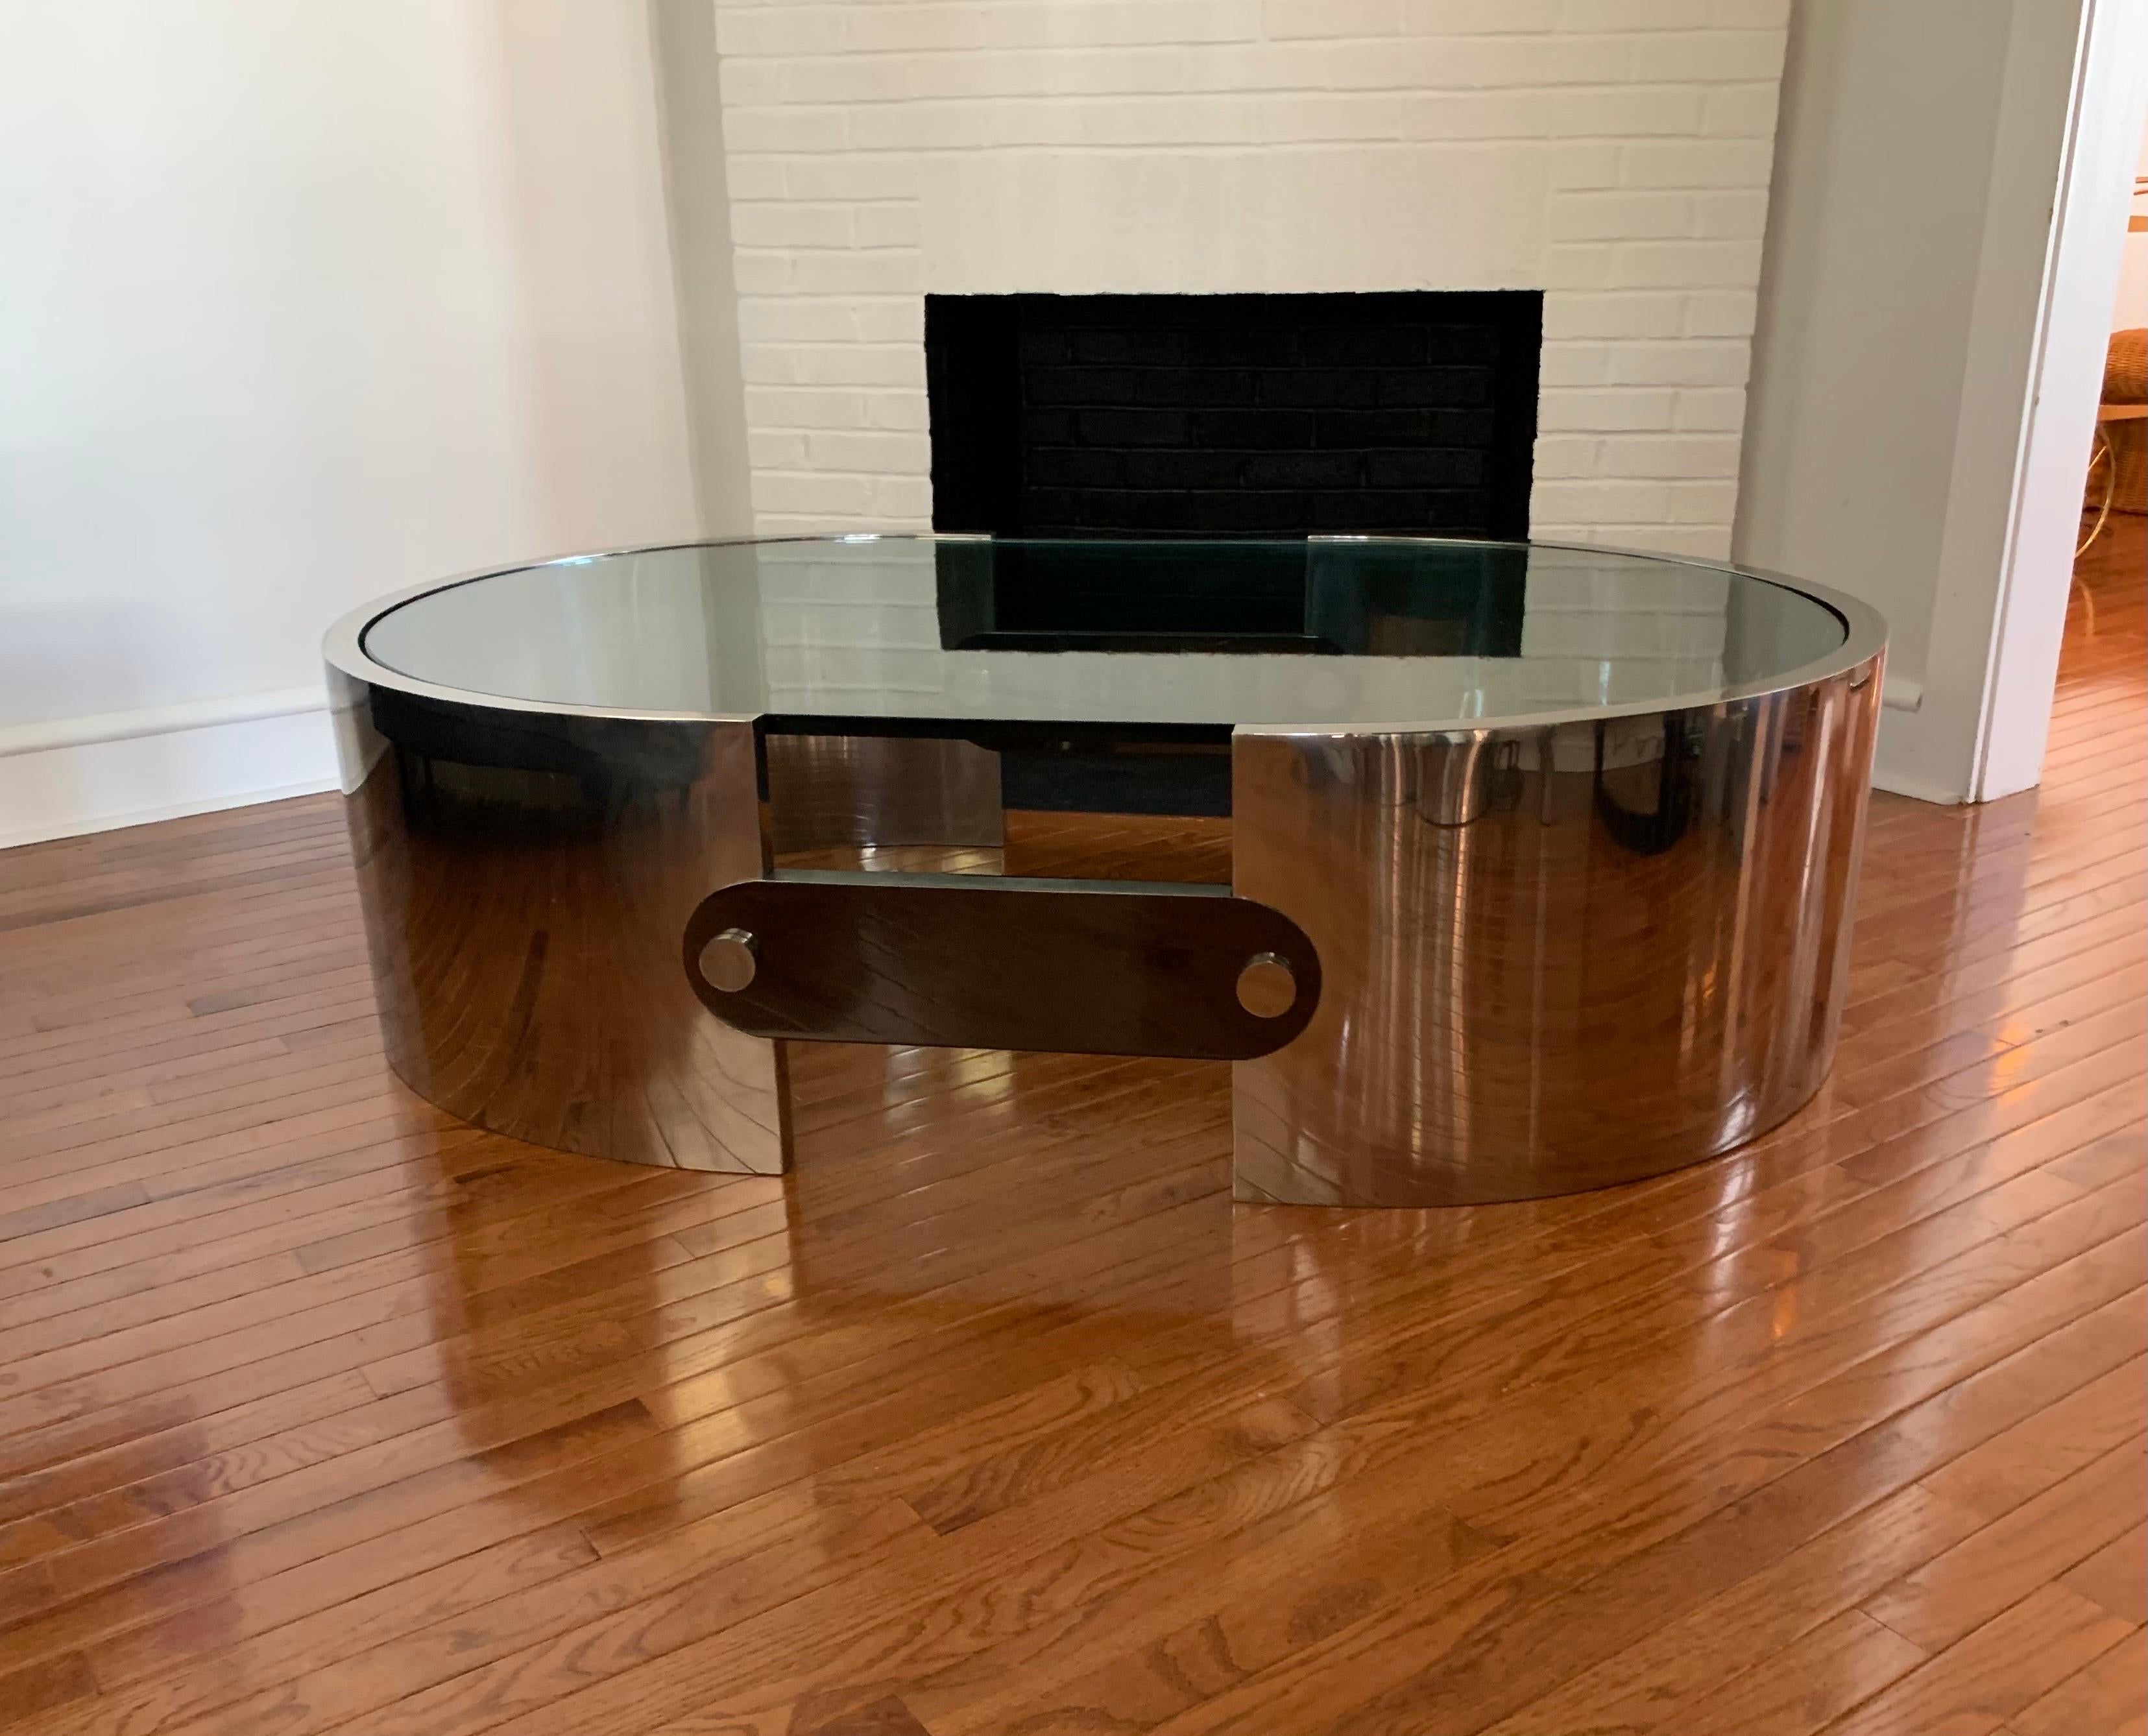 1970s Modern Polished Steel & Glass Coffee Table by Ron Seff for Karl Springer 4